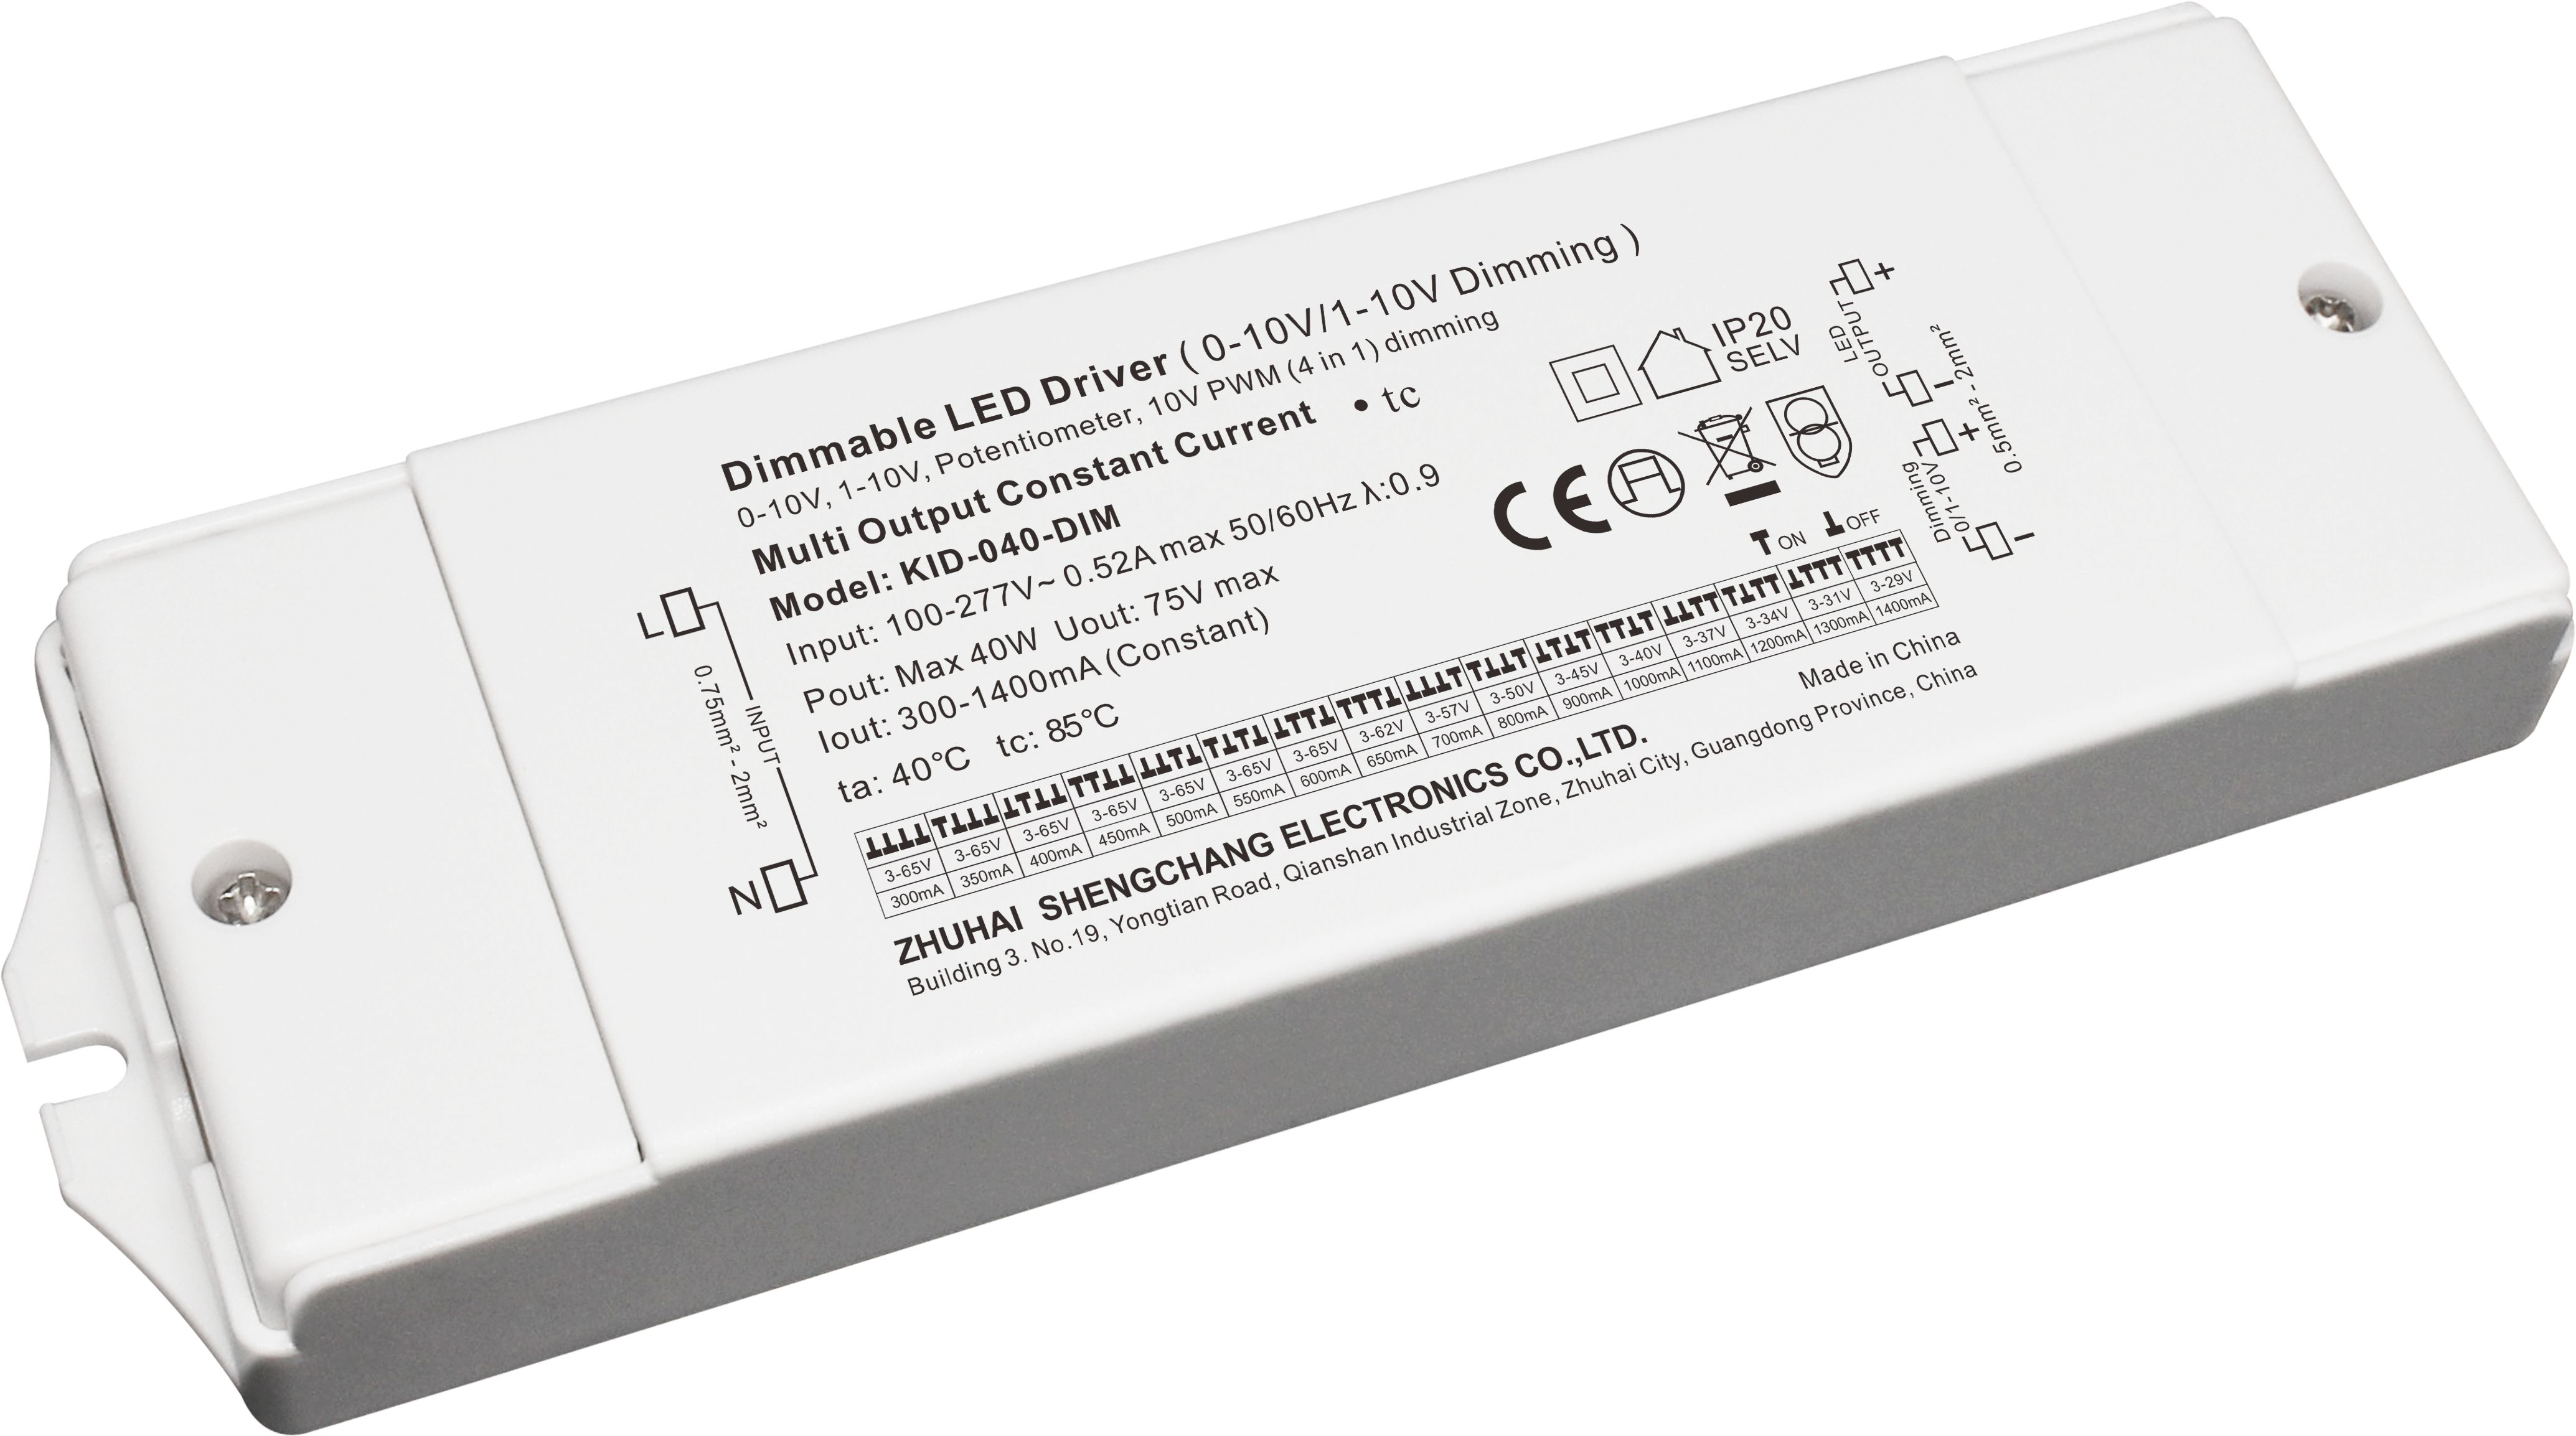 KID-DIM Series 40W Constant Current 0/1-10V Potentiometer/10V PWM (4 in 1) Dimmable LED driver